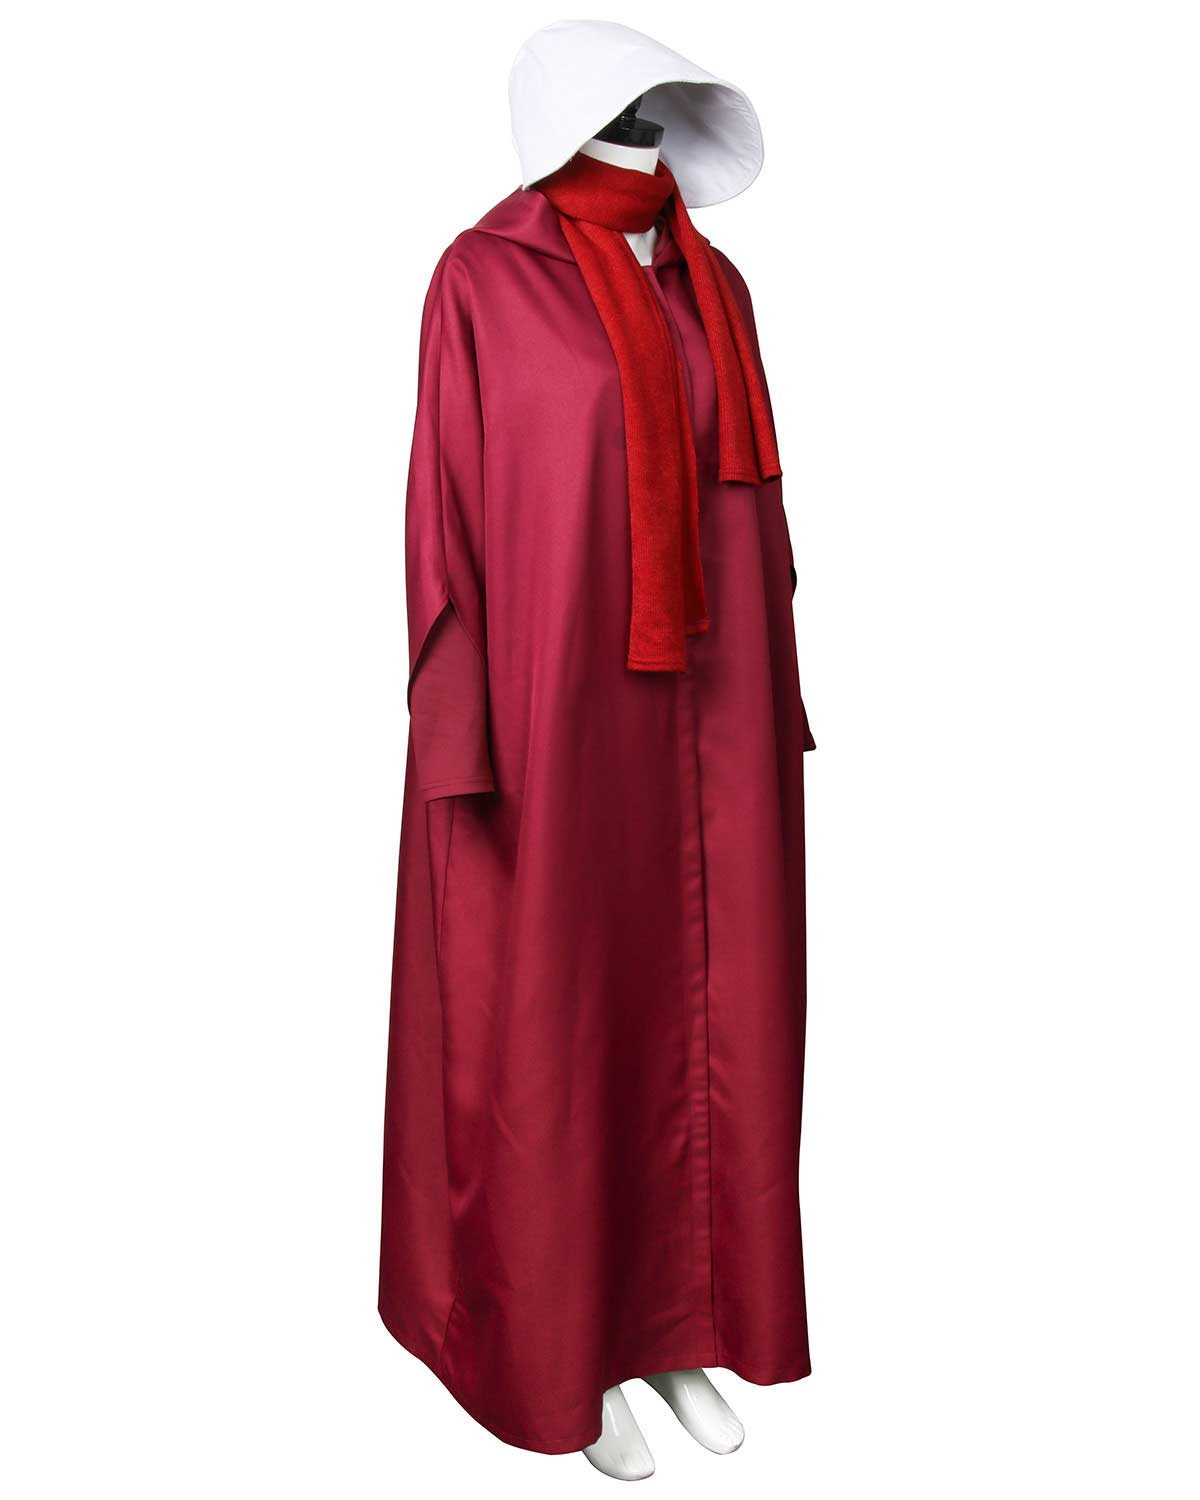 The Handmaid's Tale June Osborne Red Cape Costume For Halloween Party